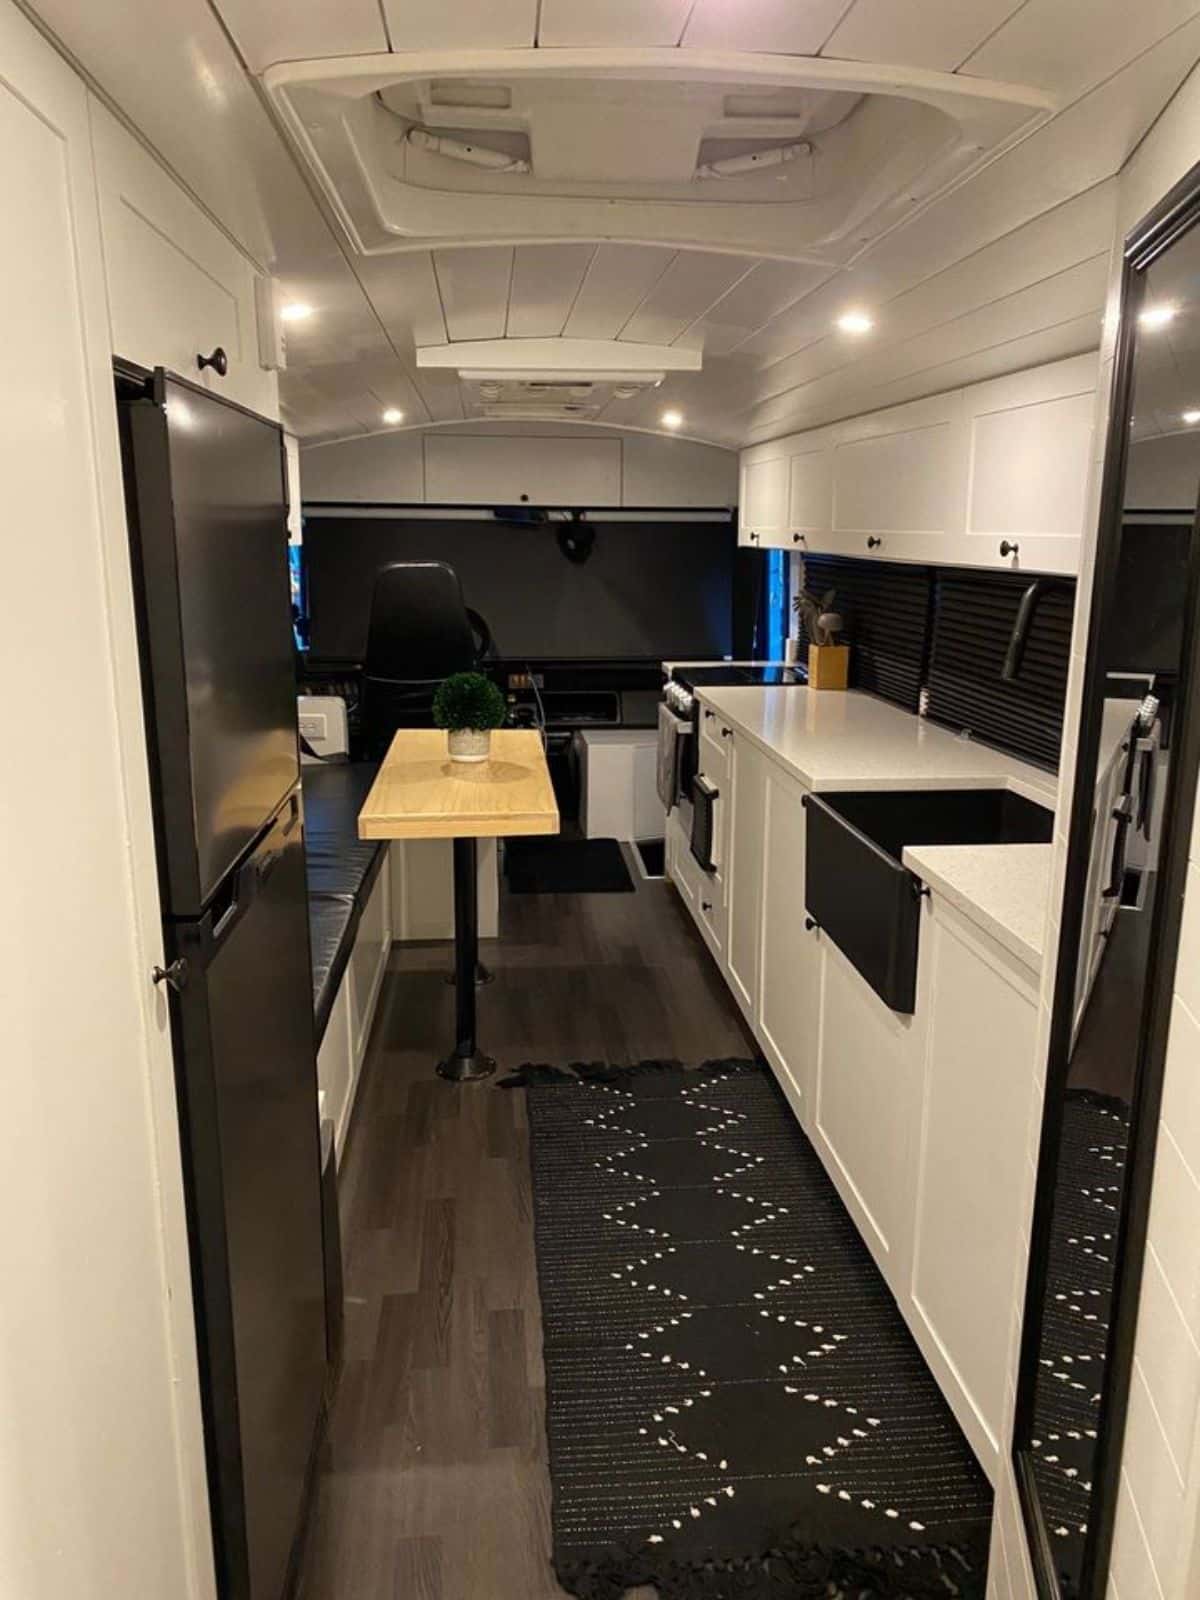 Amazing black and white interiors of Professionally Built Tiny Home on wheels